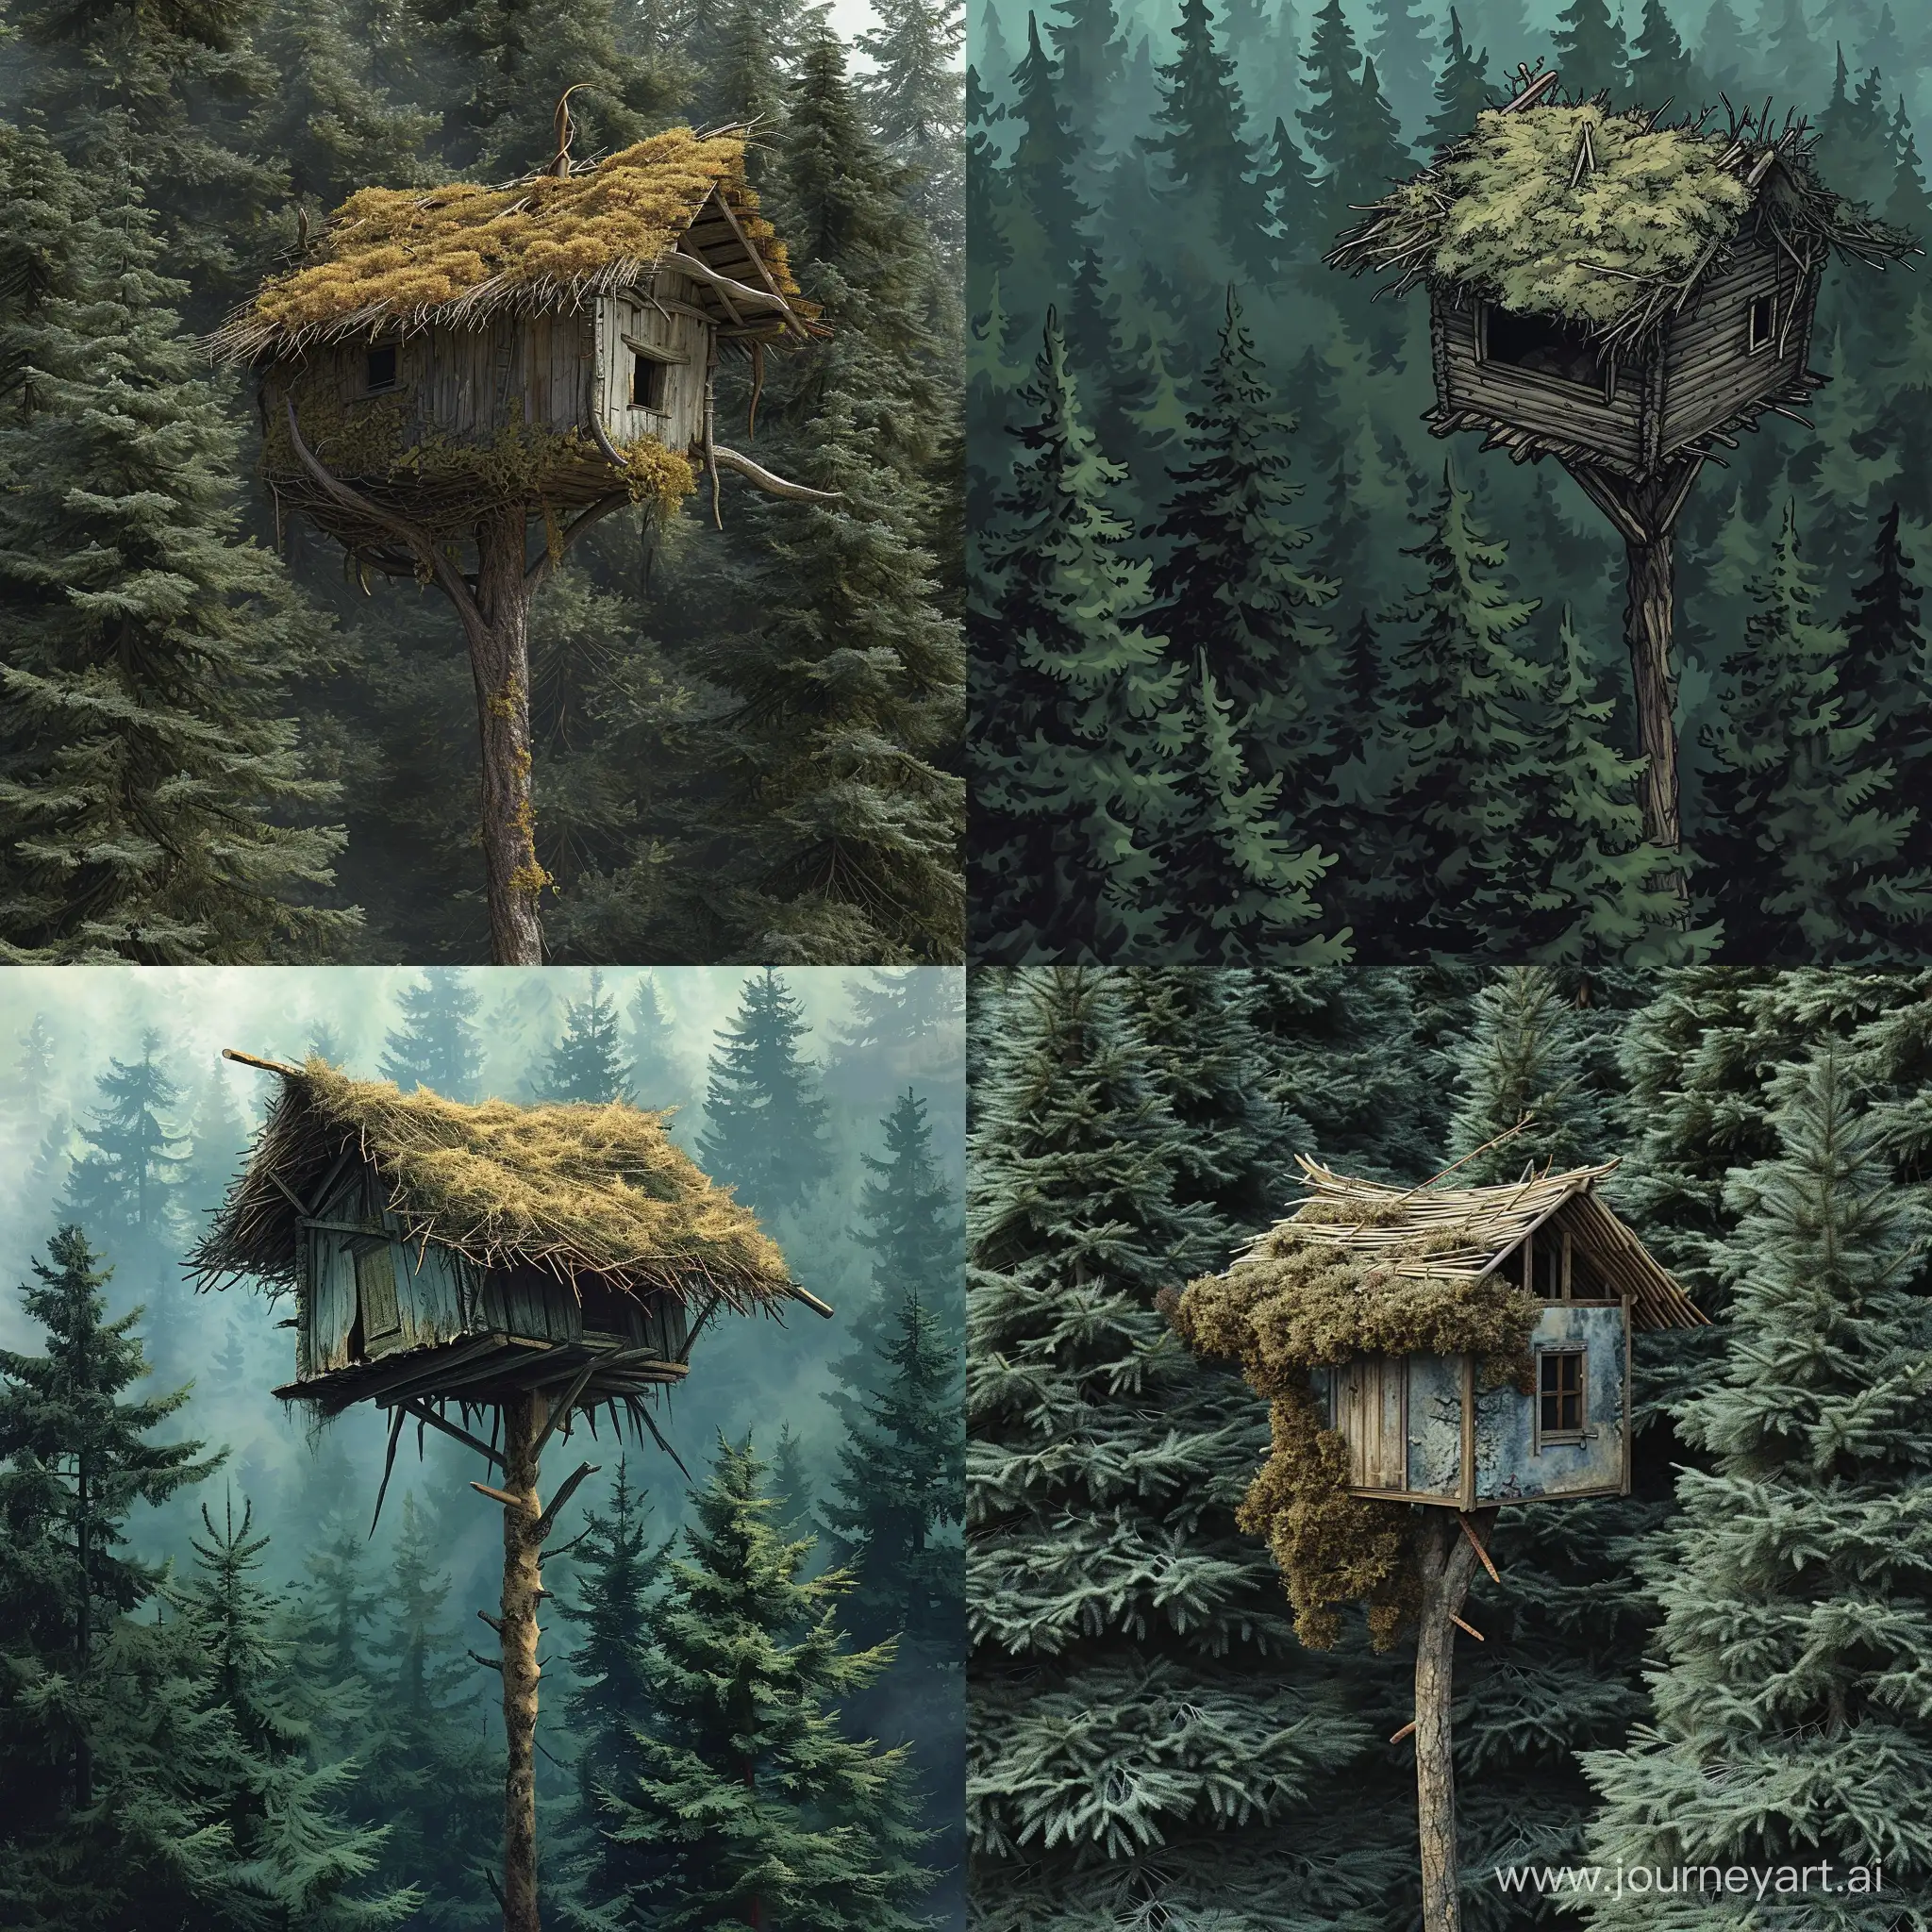 The hut is old, small, with a roof of twigs, standing on a pole, in a dense forest, among spruce trees, in the style of a caricature